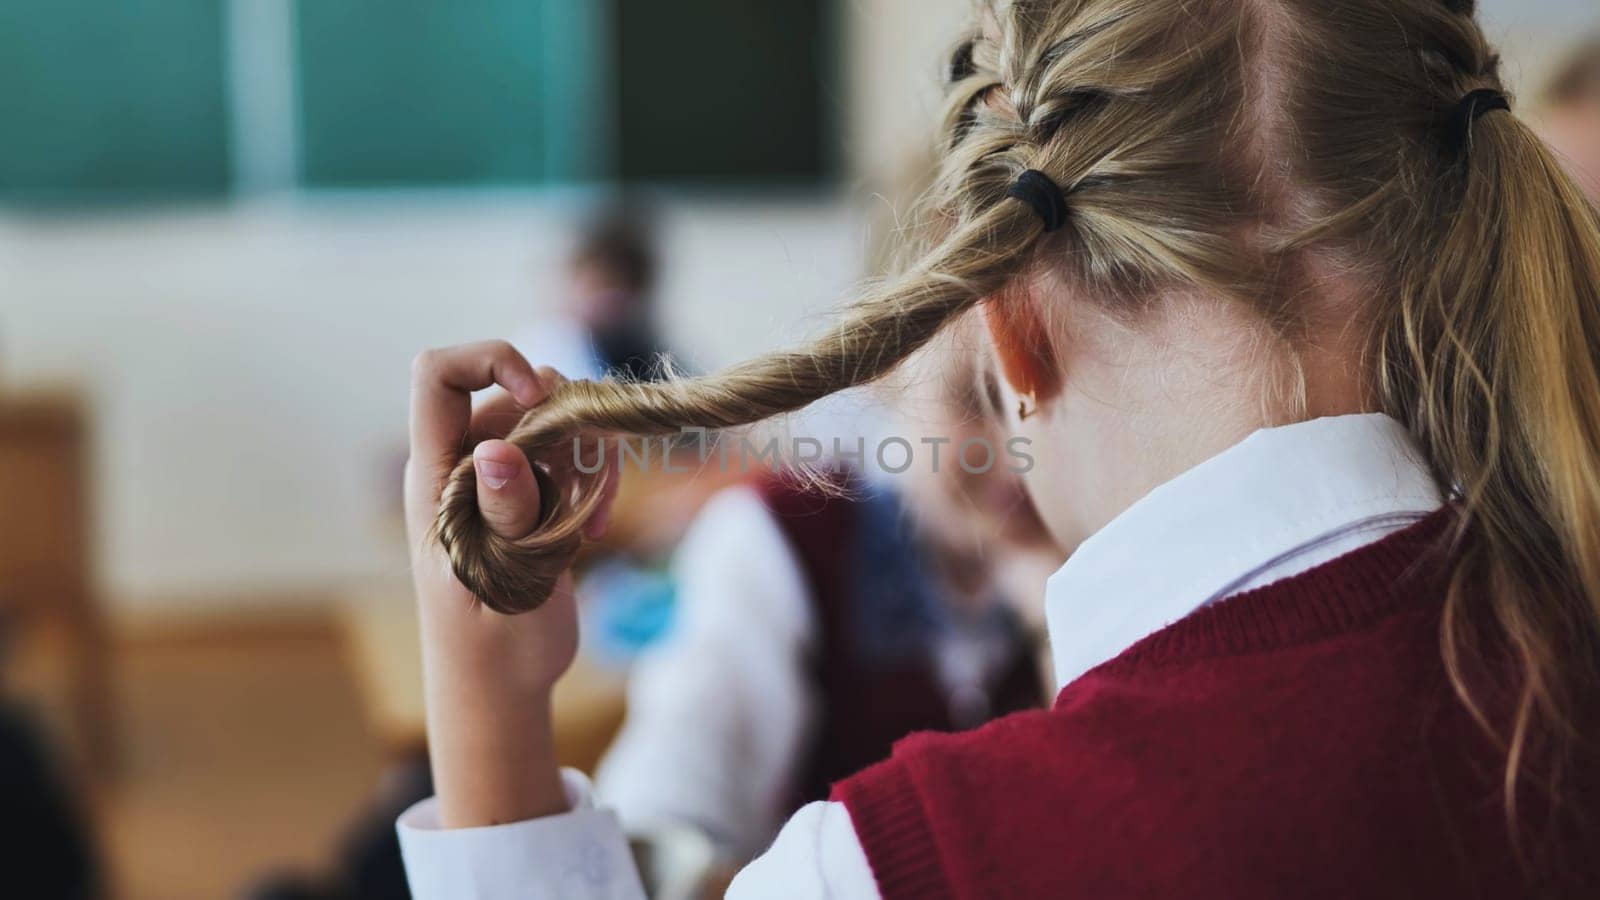 A girl touches a ponytail of her hair during class